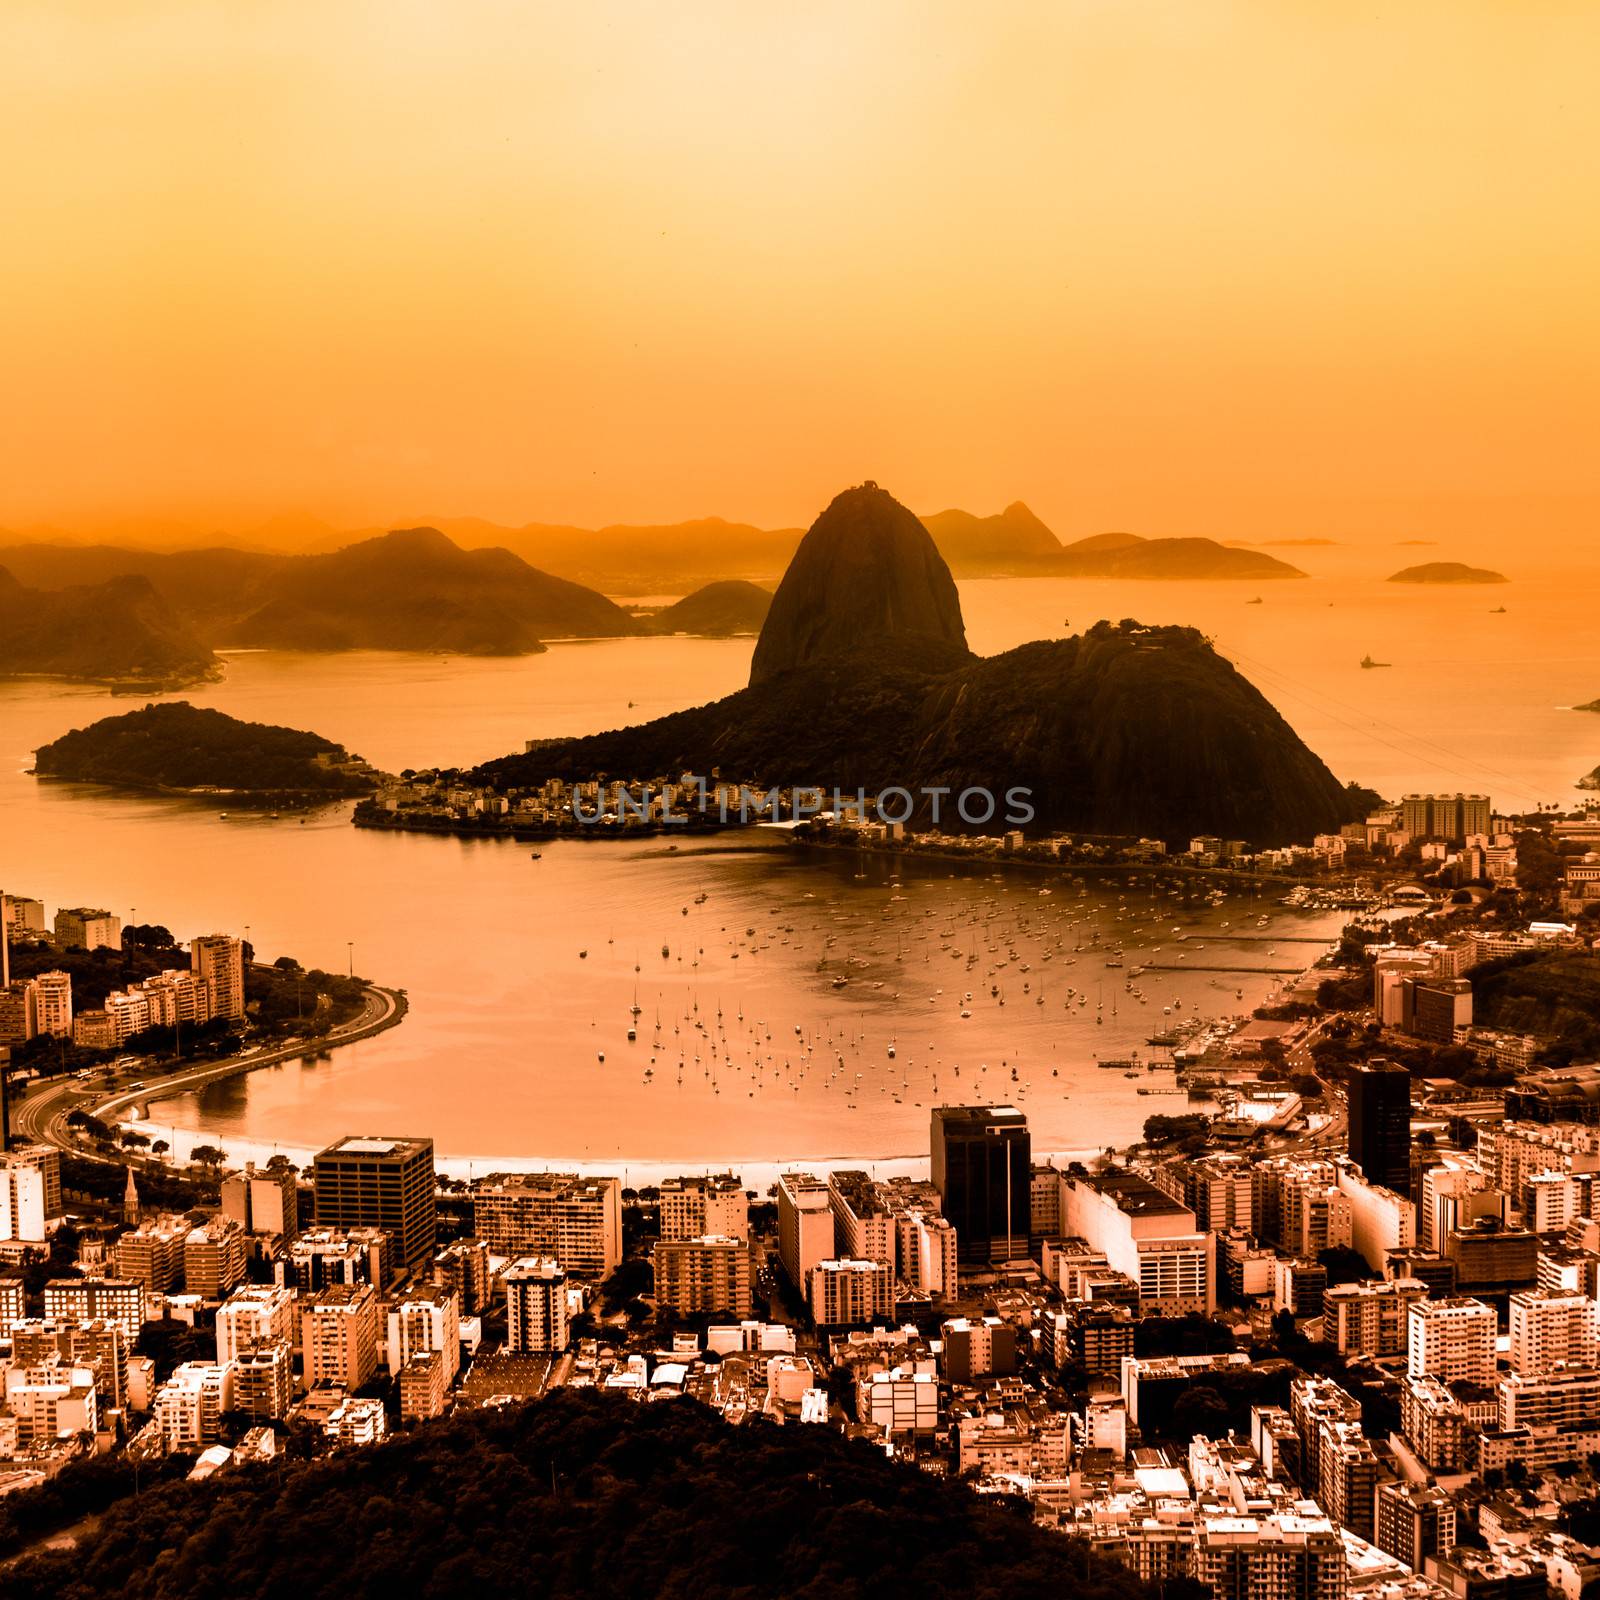 Rio de Janeiro, Brazil. Suggar Loaf and  Botafogo beach viewed from Corcovado at sunset. Rio de Janeiro is the 2016 summer olympic games hosting city.